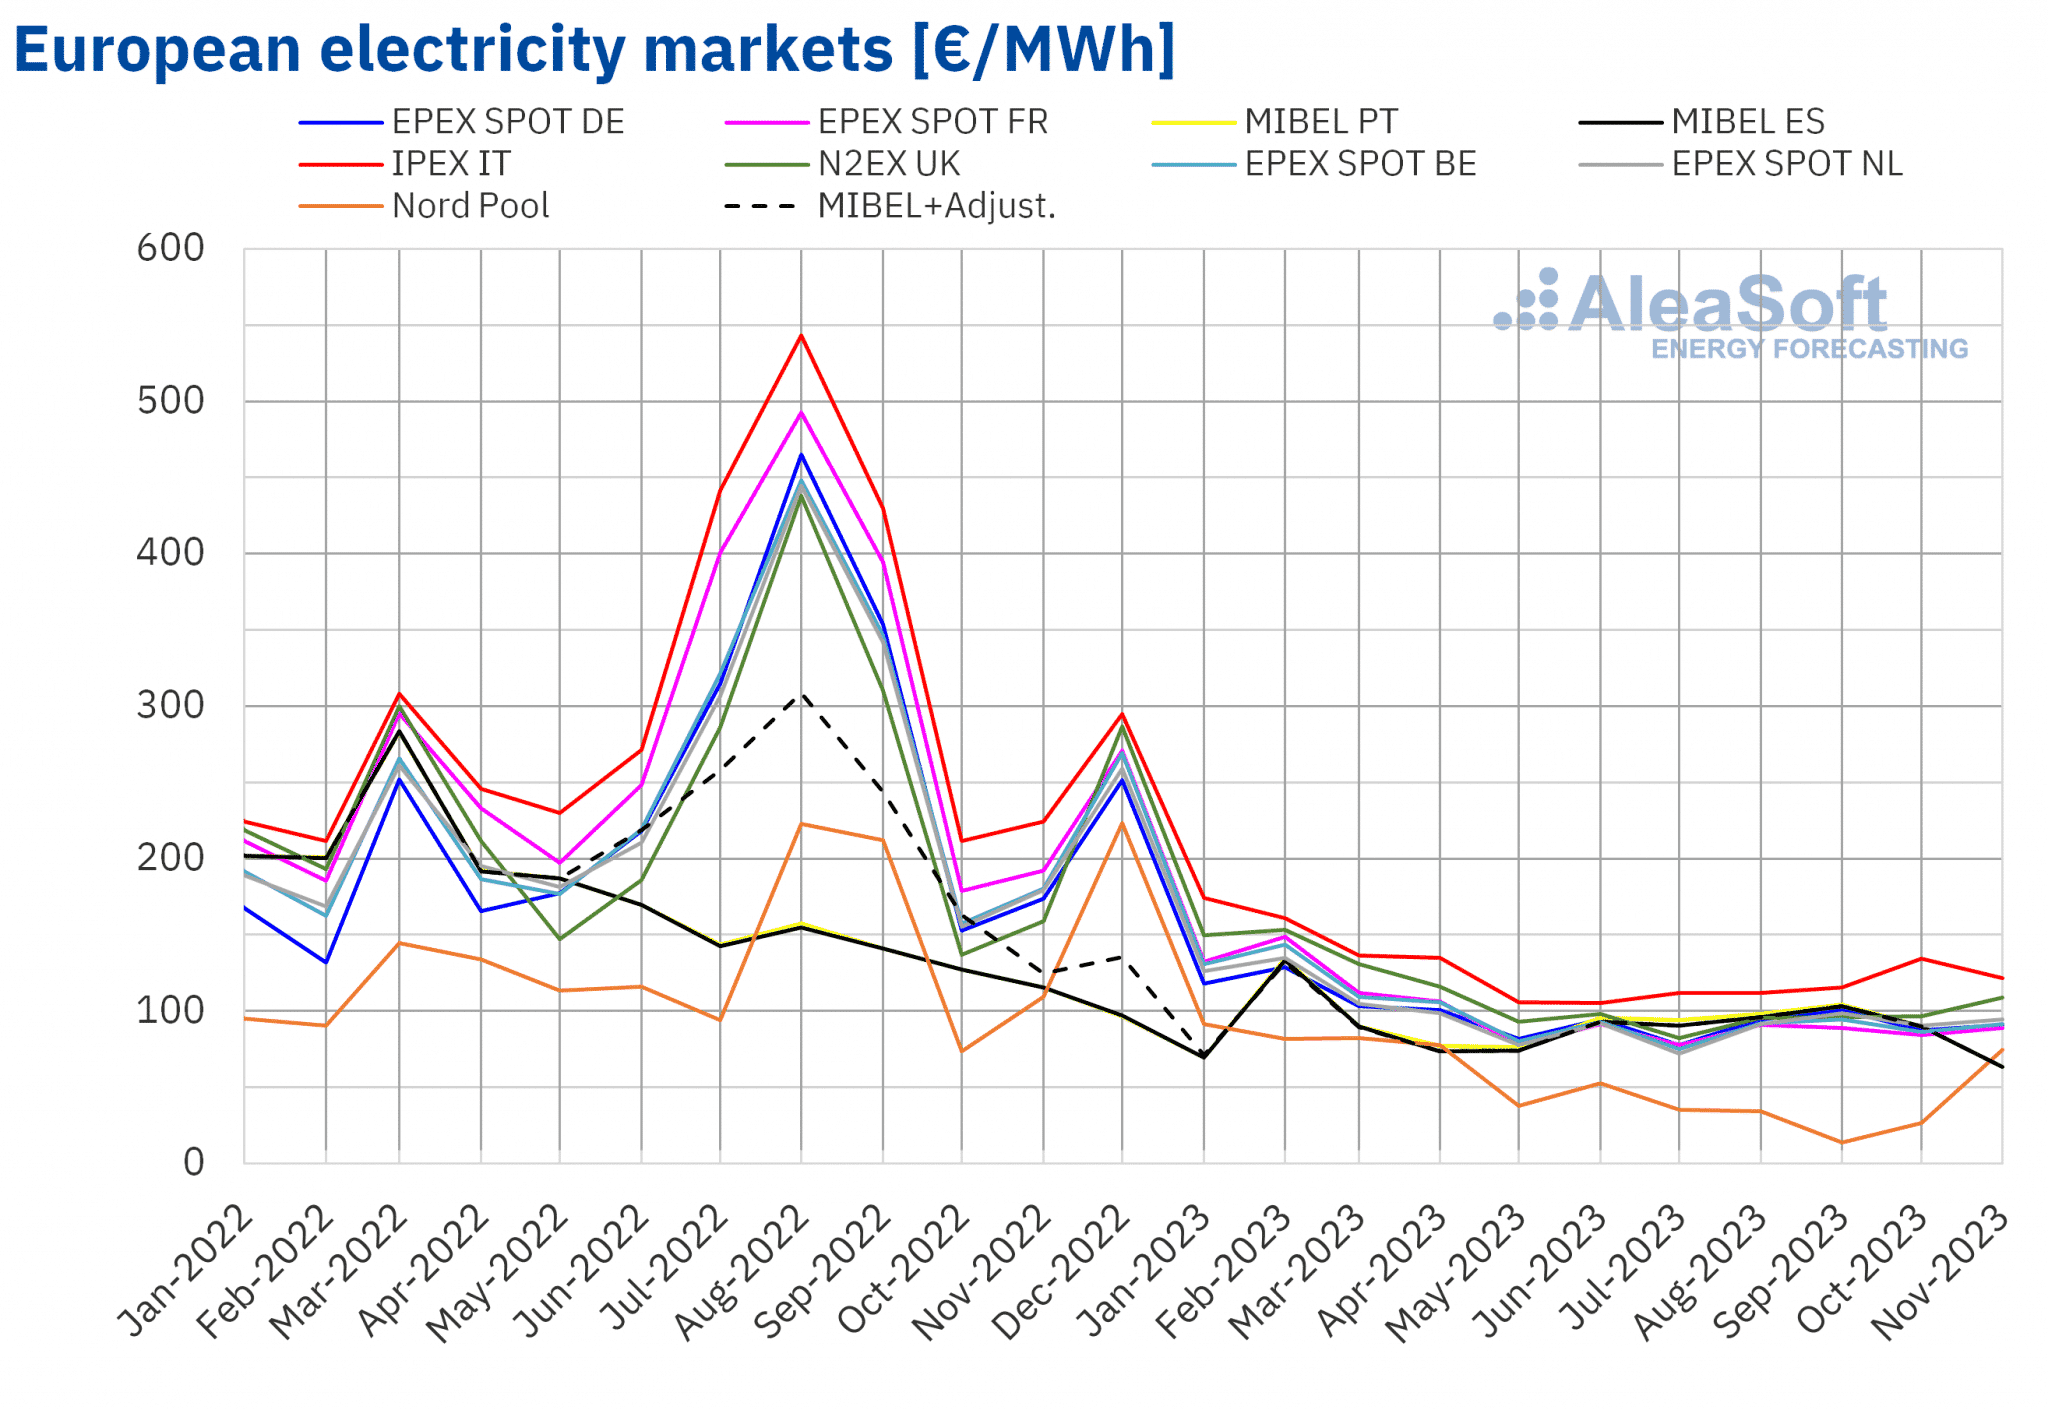 AleaSoft - Monthly electricity market prices Europe